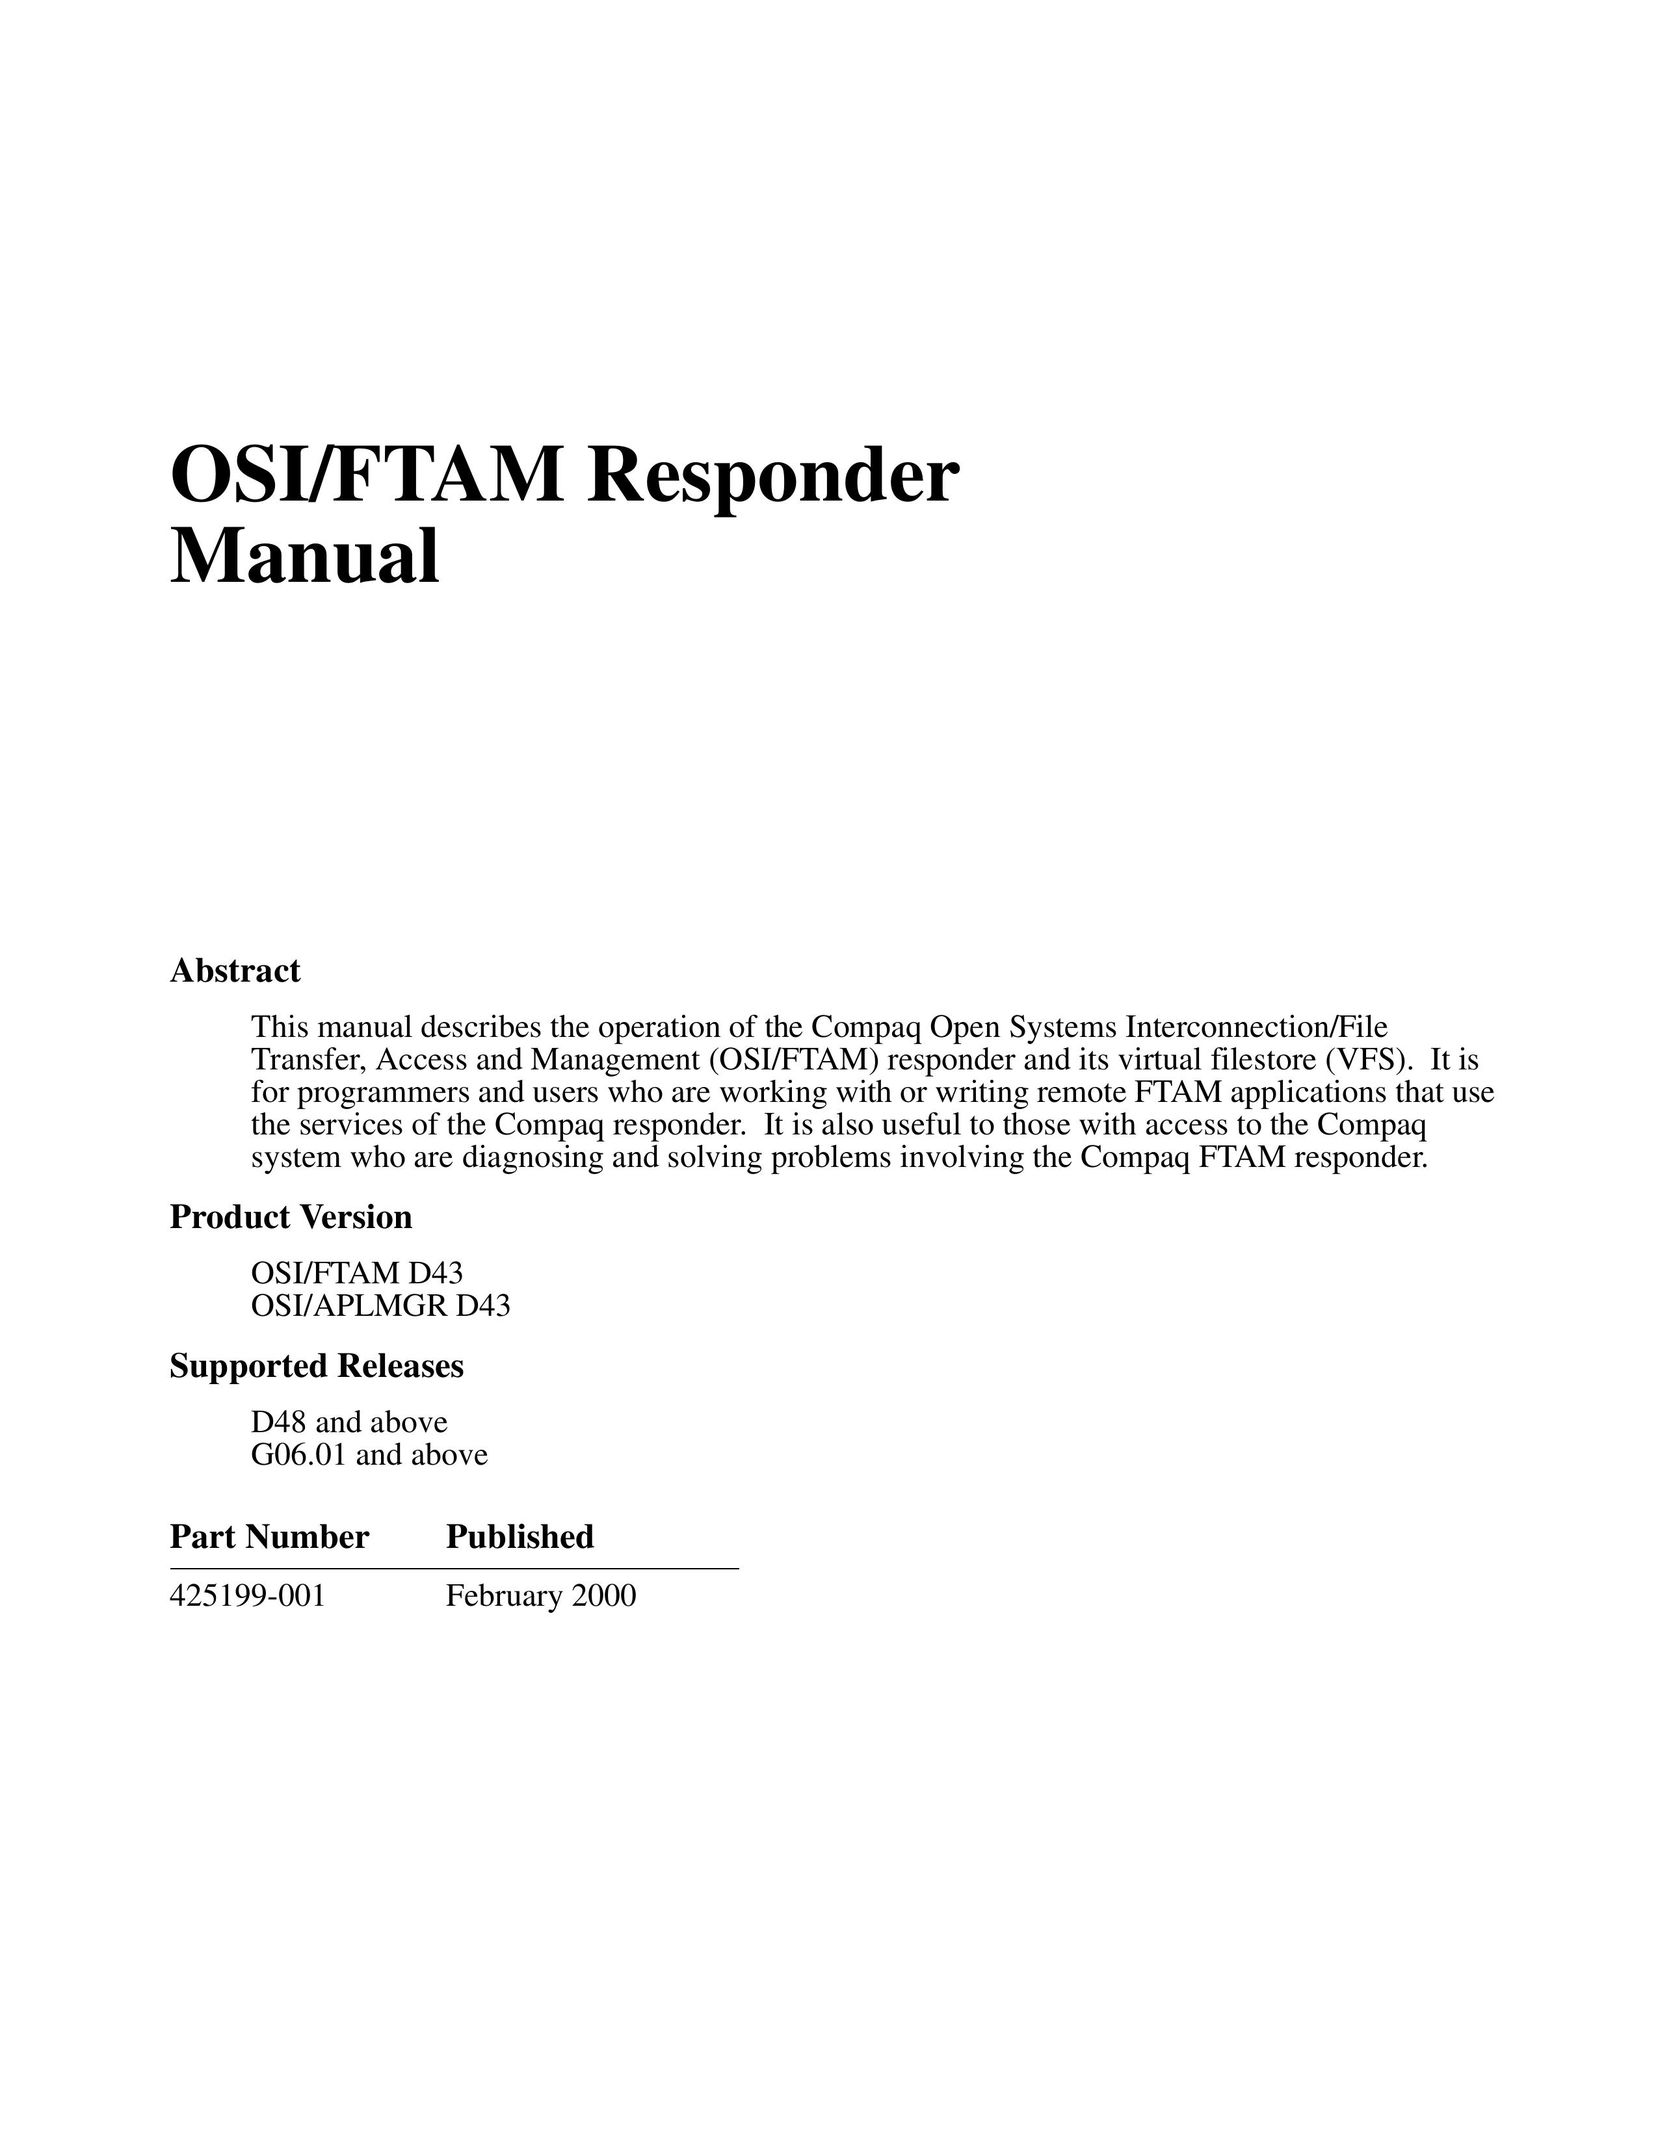 Compaq OSI/APLMGR D43 Network Router User Manual